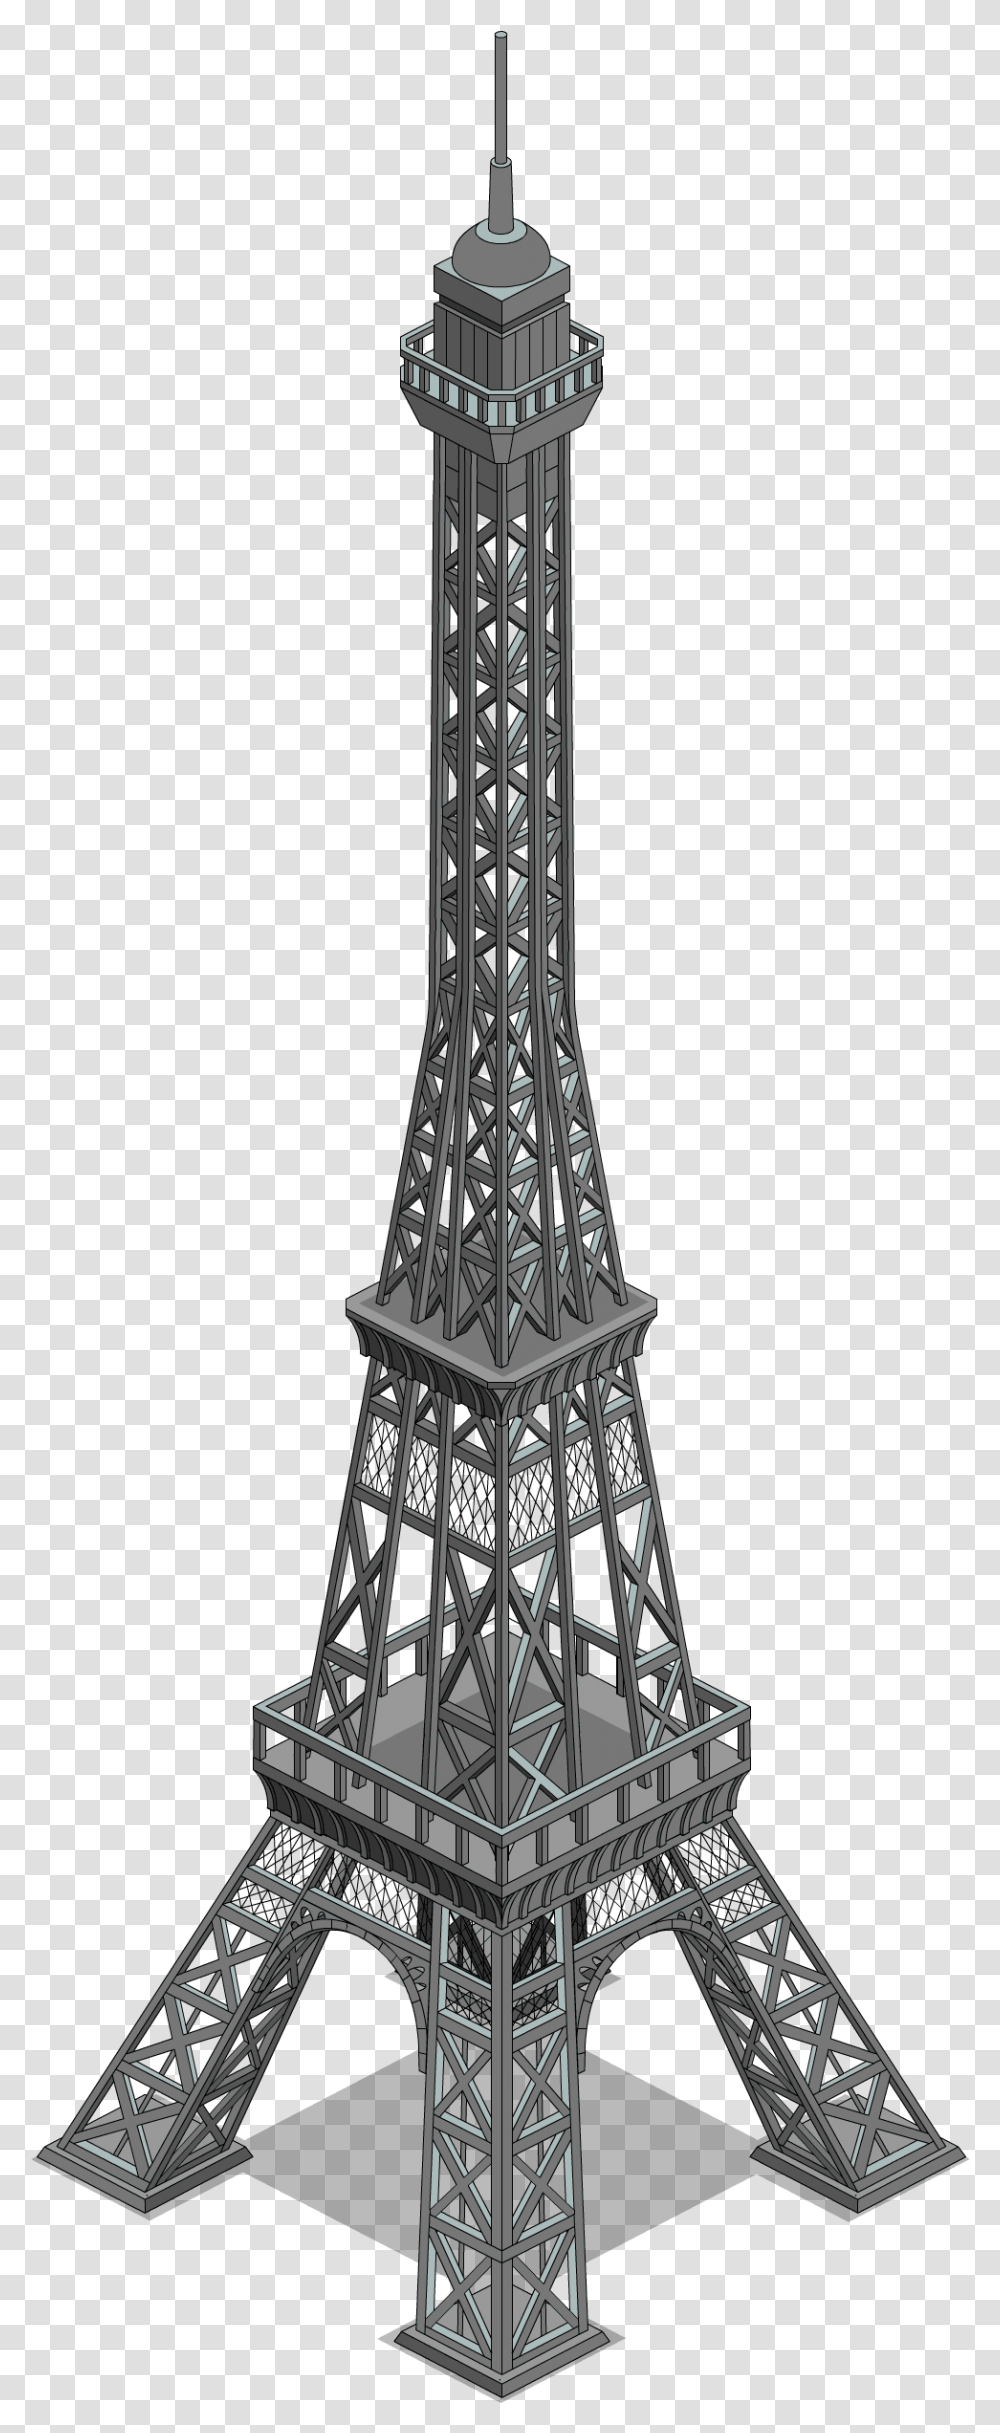 Eiffel Tower The Simpsons Tapped Out, Architecture, Building, Spire, Chair Transparent Png